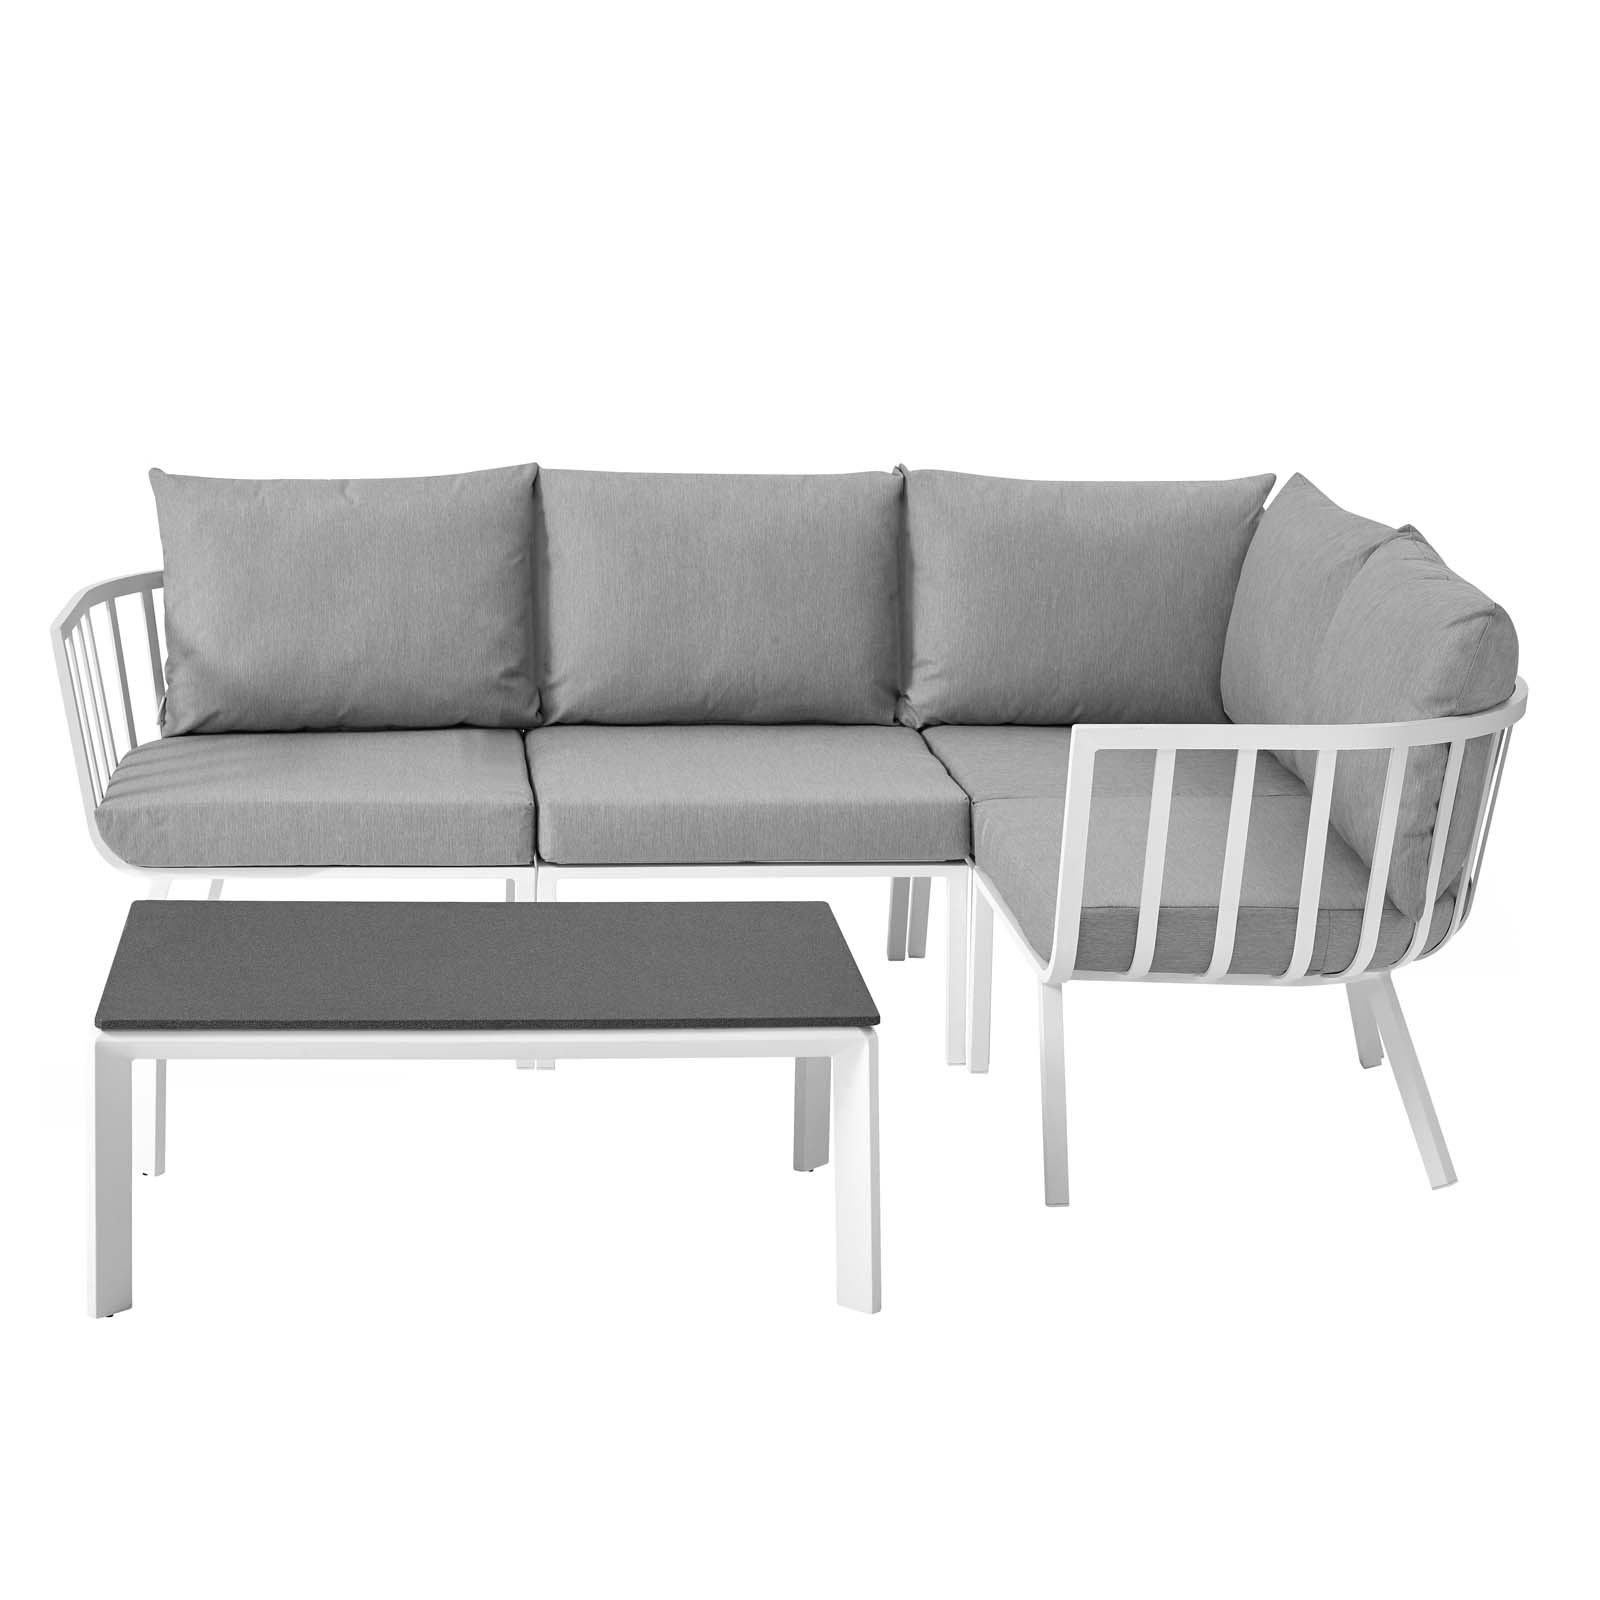 Lounge Sectional Sofa Chair Set, Aluminum, Metal, Steel, White Grey Gray, Modern Contemporary Urban Design, Outdoor Patio Balcony Cafe Bistro Garden Furniture Hotel Hospitality - image 1 of 10